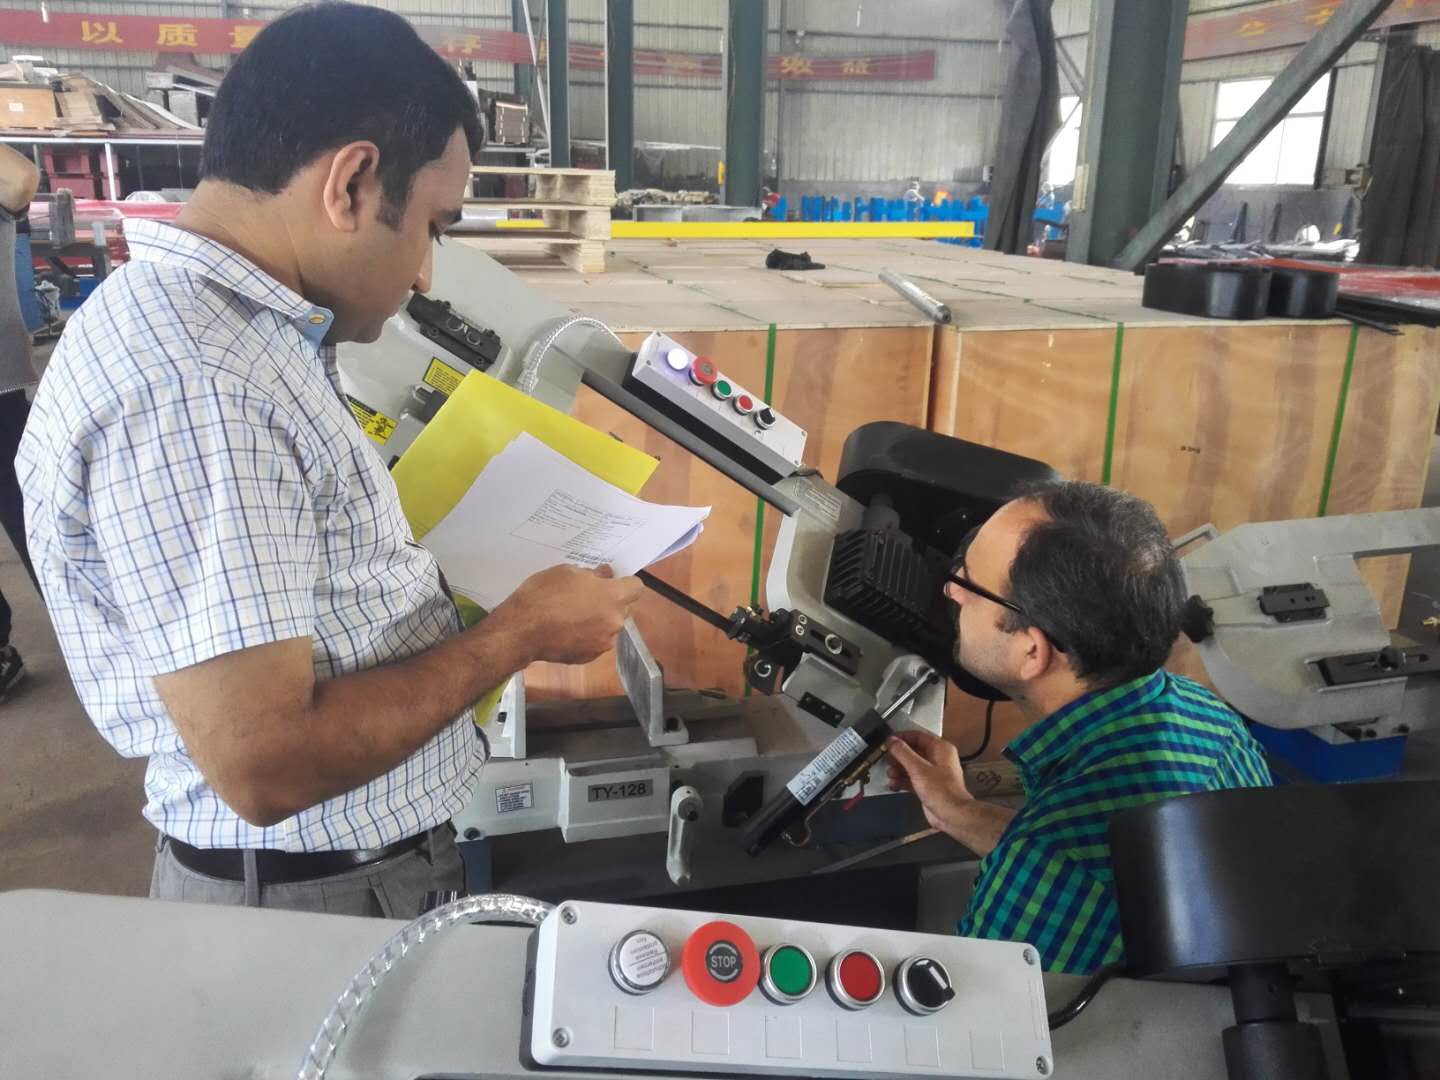 Pakistani customers came to our factory for on-site inspection and finally signed a large amount of contract